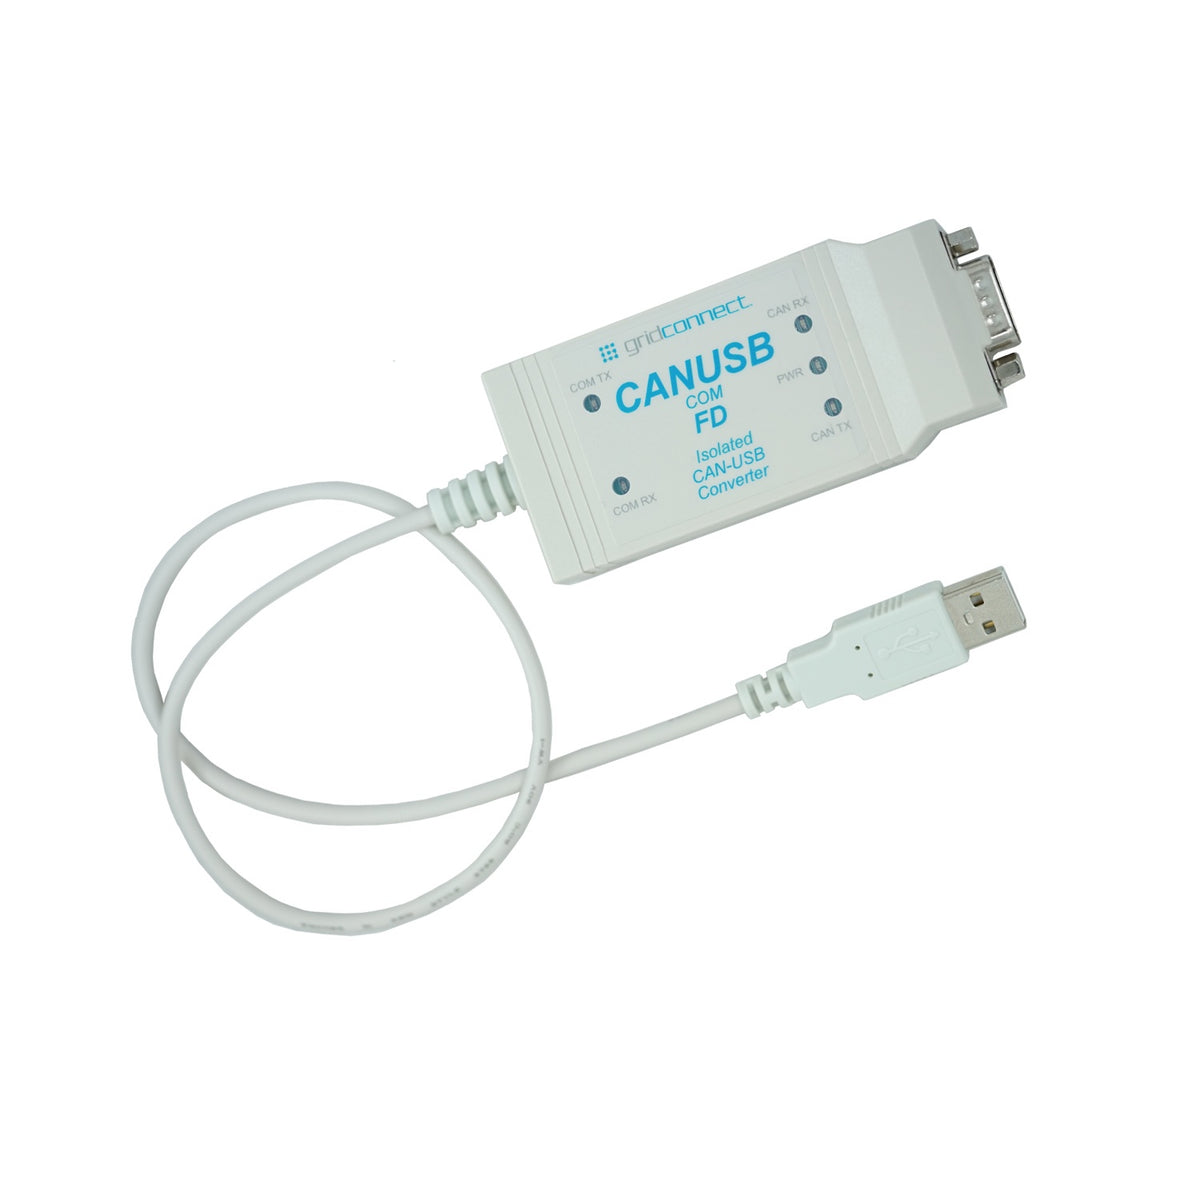 CANUSB - USB CAN FD/CAN – Grid Connect